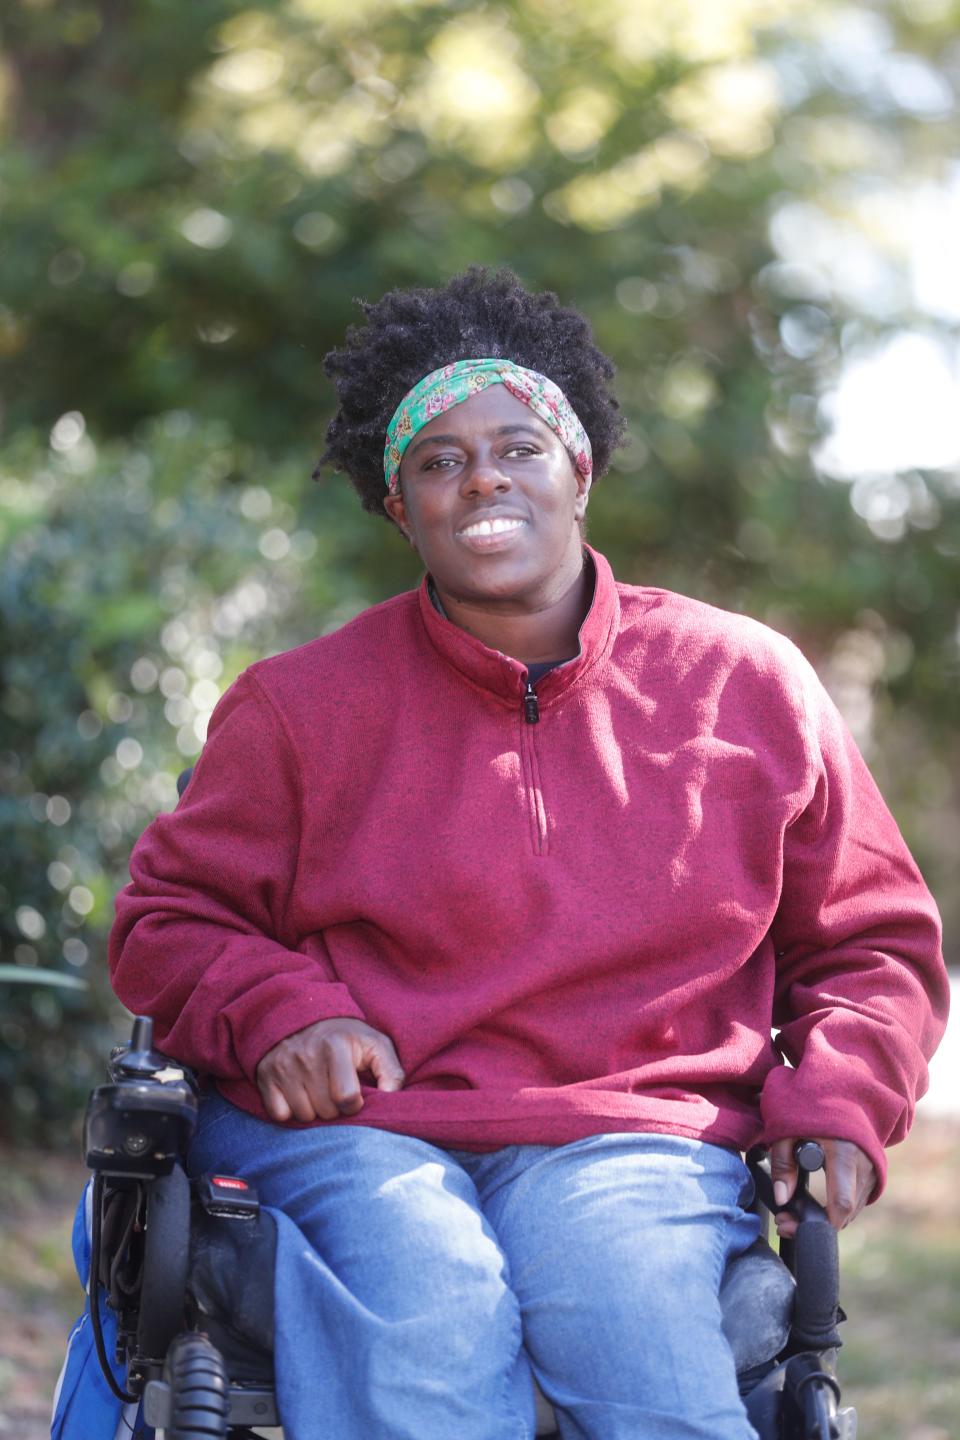 Jessica Mathis, who has cerebral palsy, is a member of the nonpartisan voting initiative, Revup GA and advocates for improved voting access for voters with disabilities.